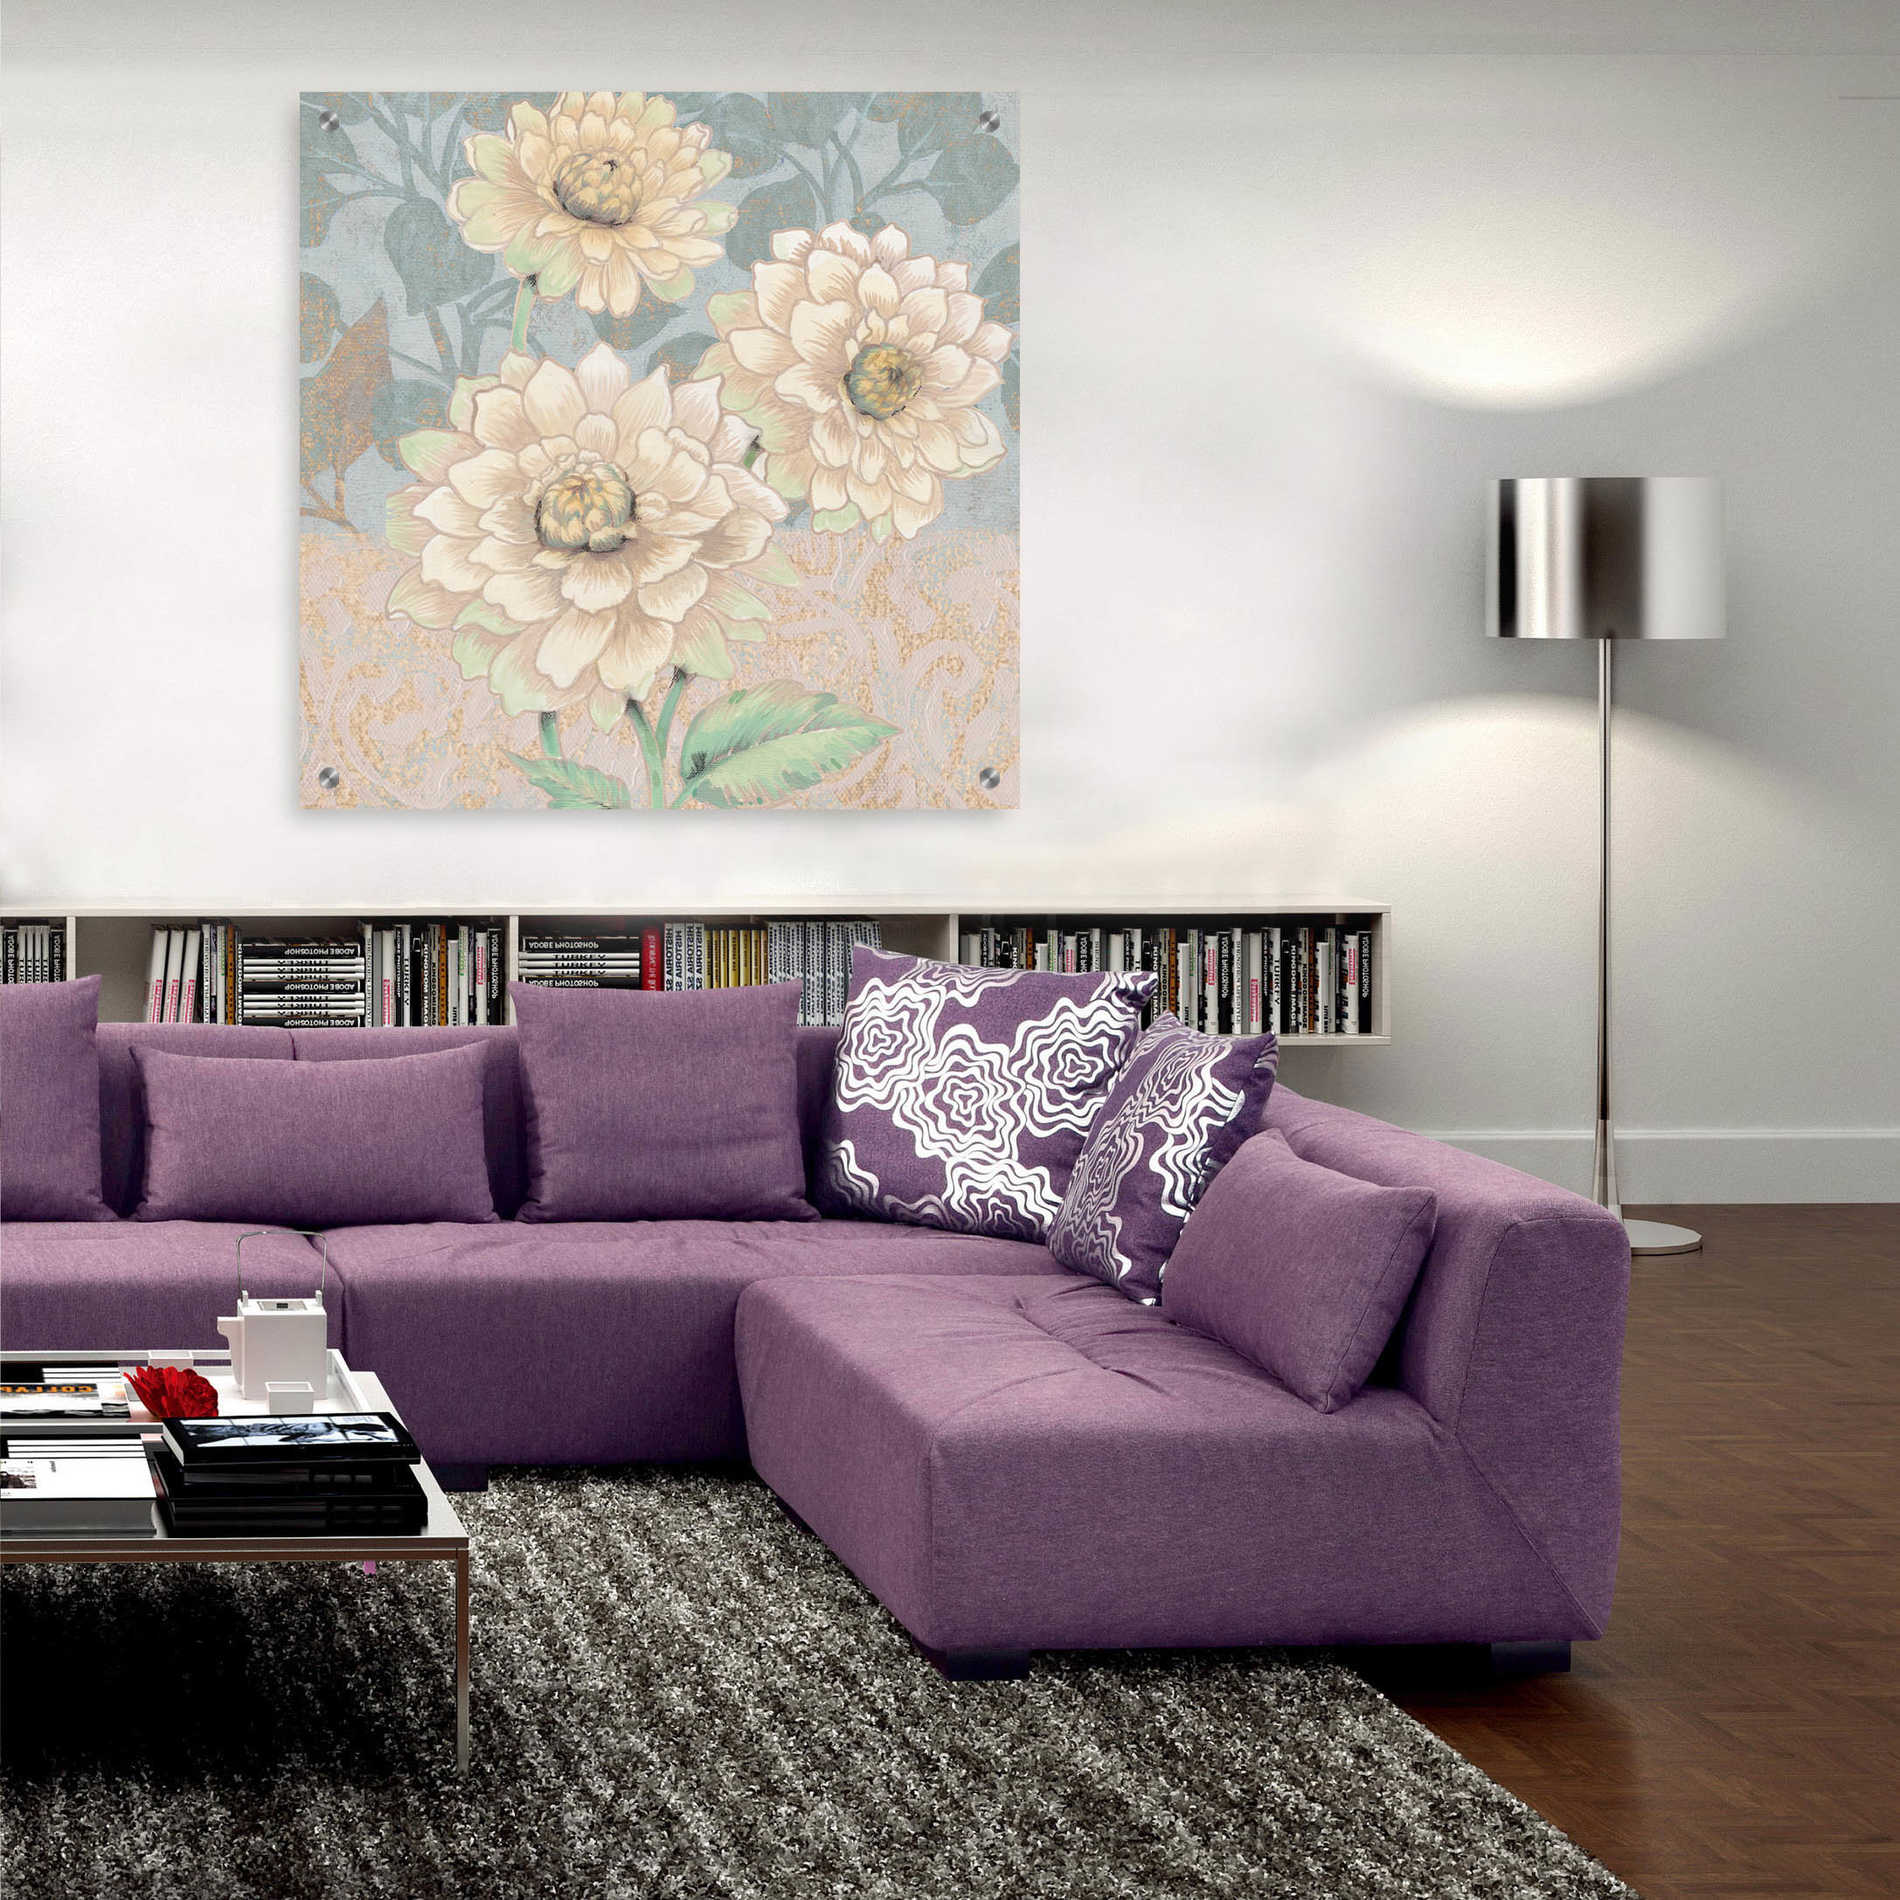 Epic Art 'Trois Fleurs Collection B' by Tim O'Toole, Acrylic Glass Wall Art,36x36